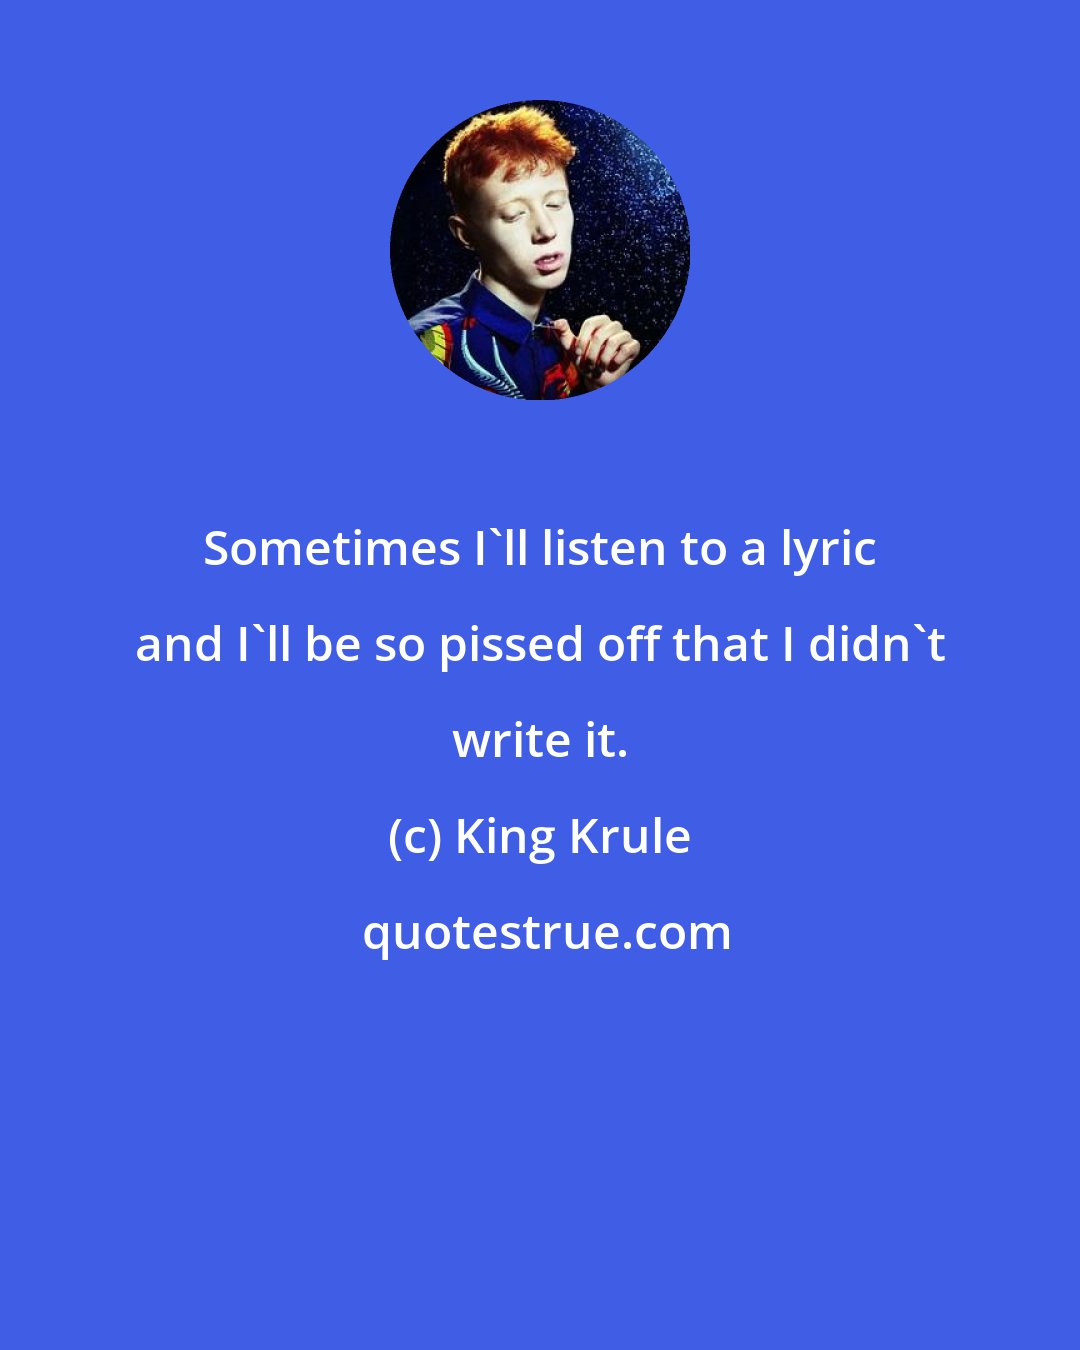 King Krule: Sometimes I'll listen to a lyric and I'll be so pissed off that I didn't write it.